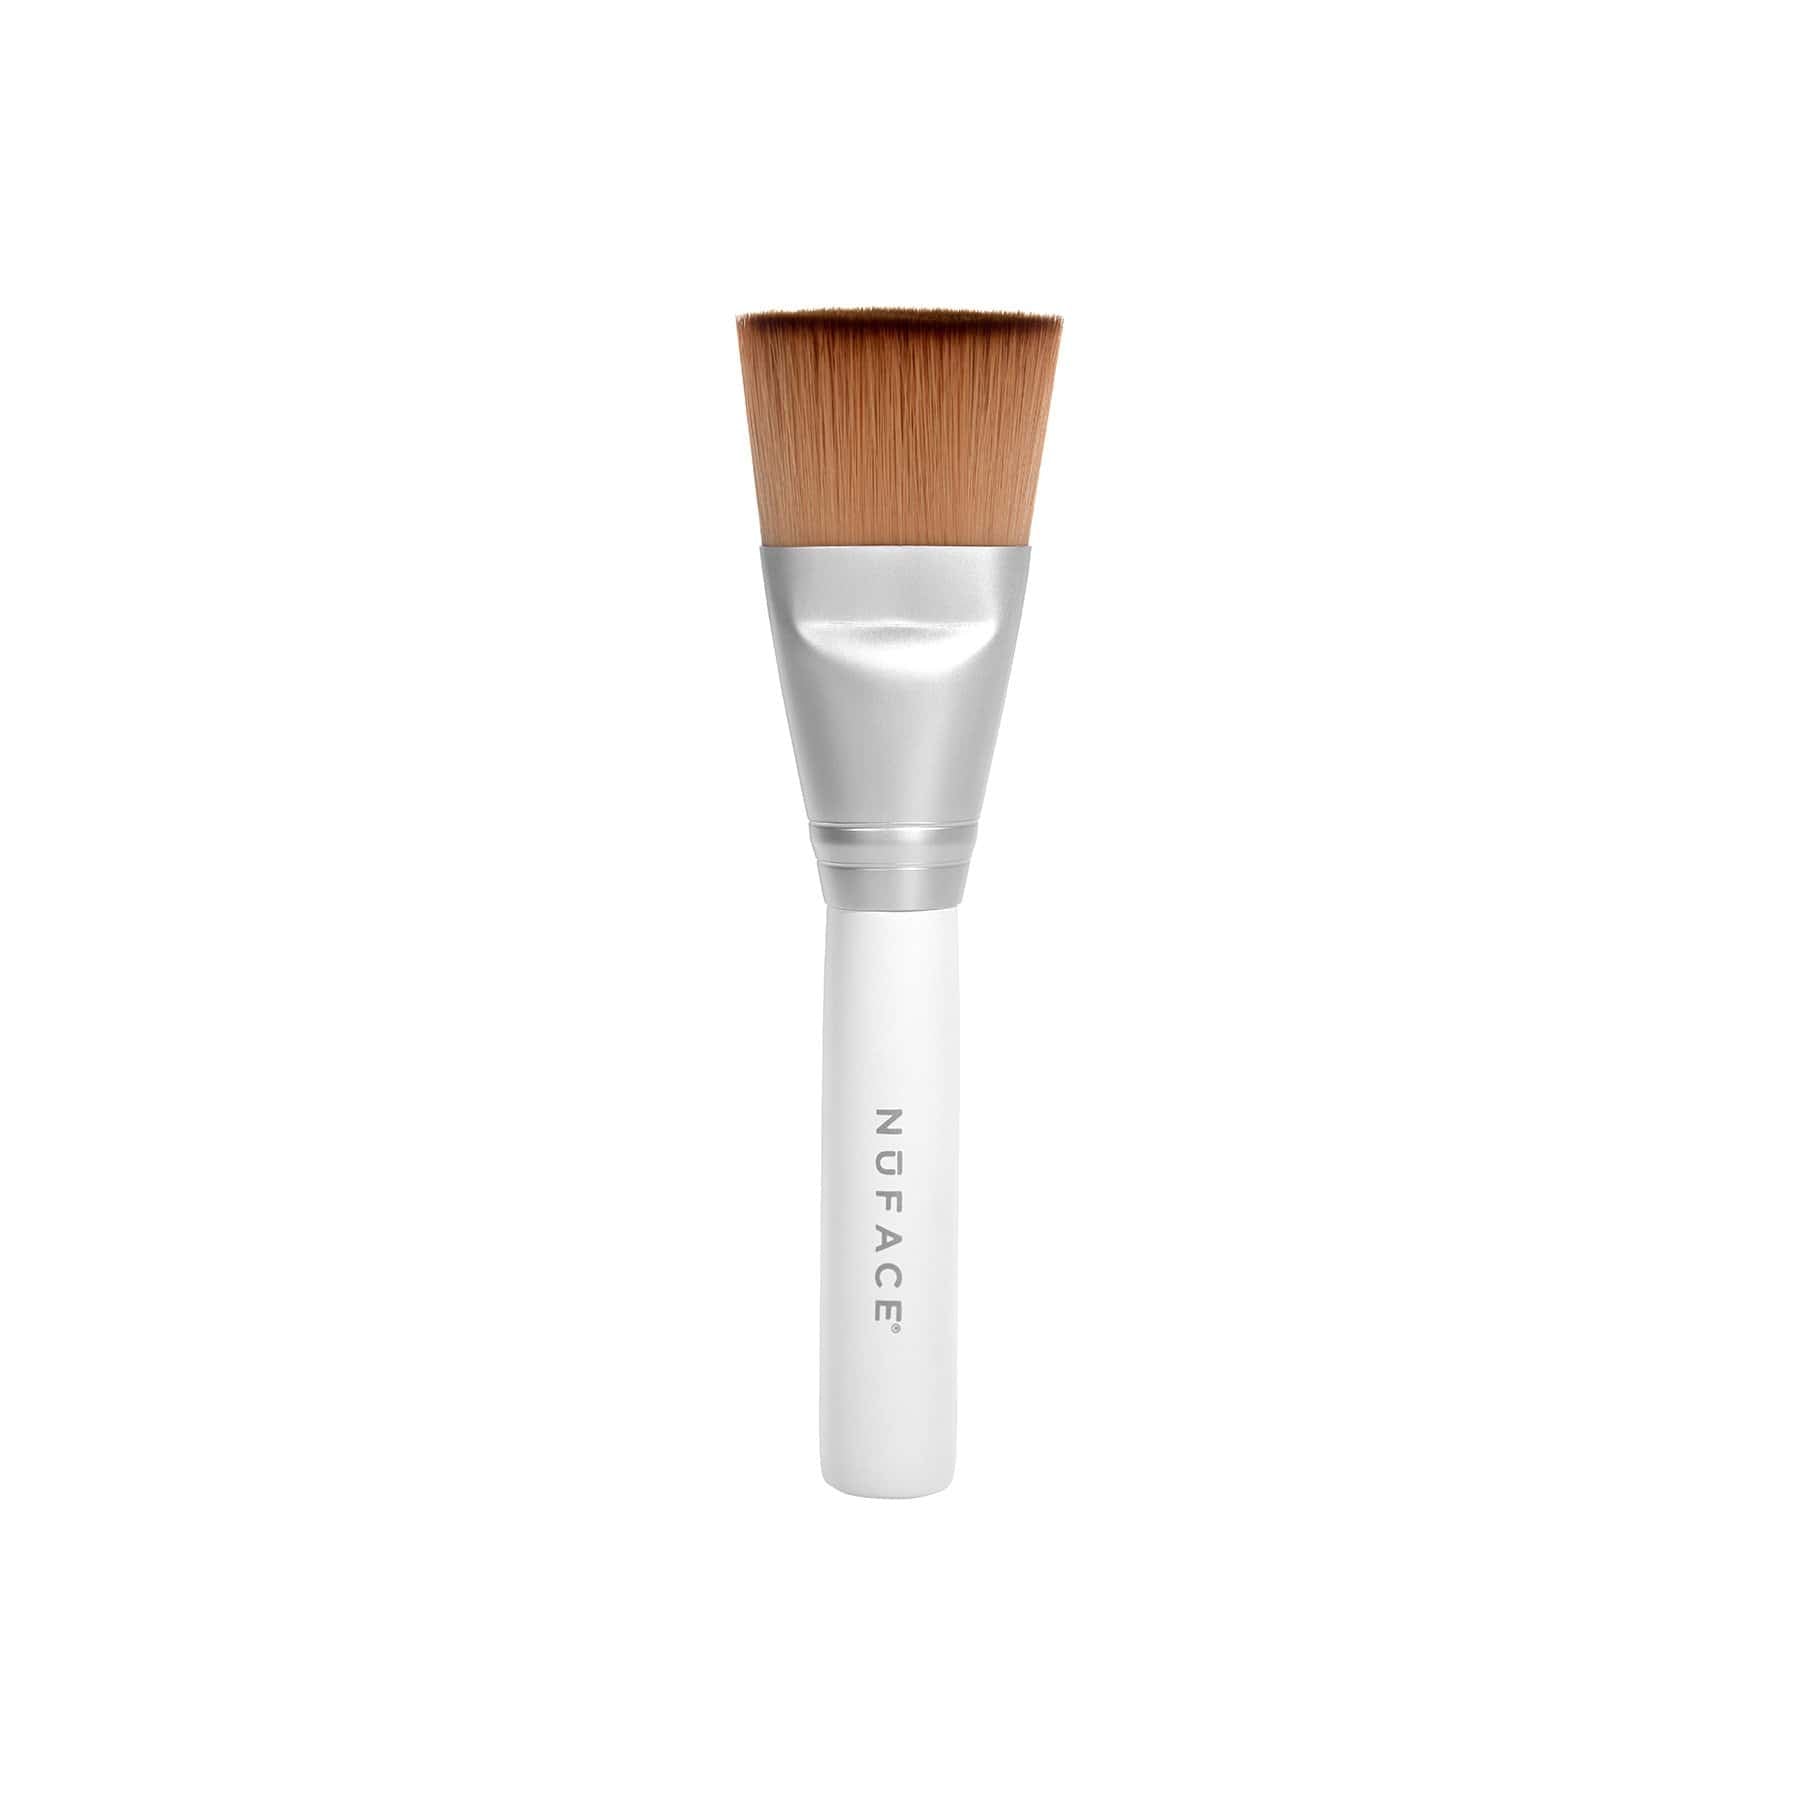 NuFace Clean Sweep Applicator Brush